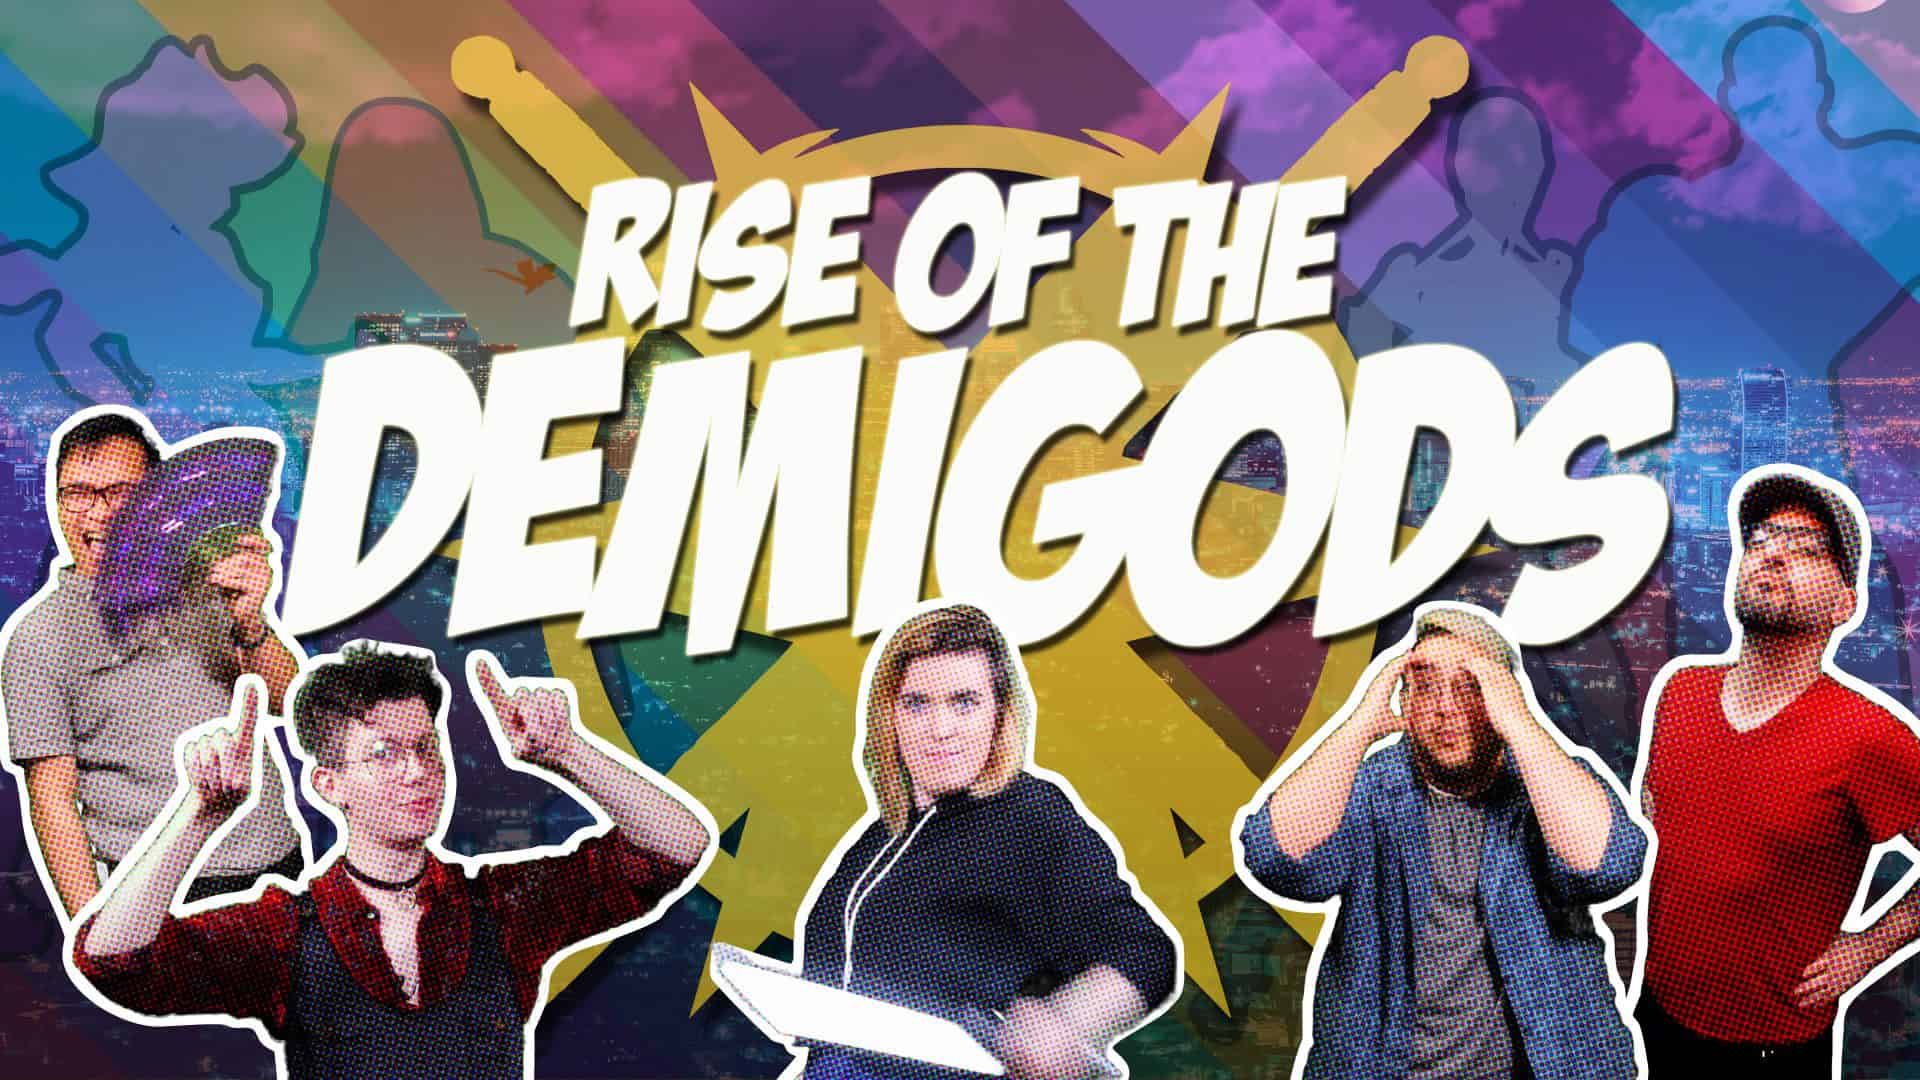 The Rise of the Demigods